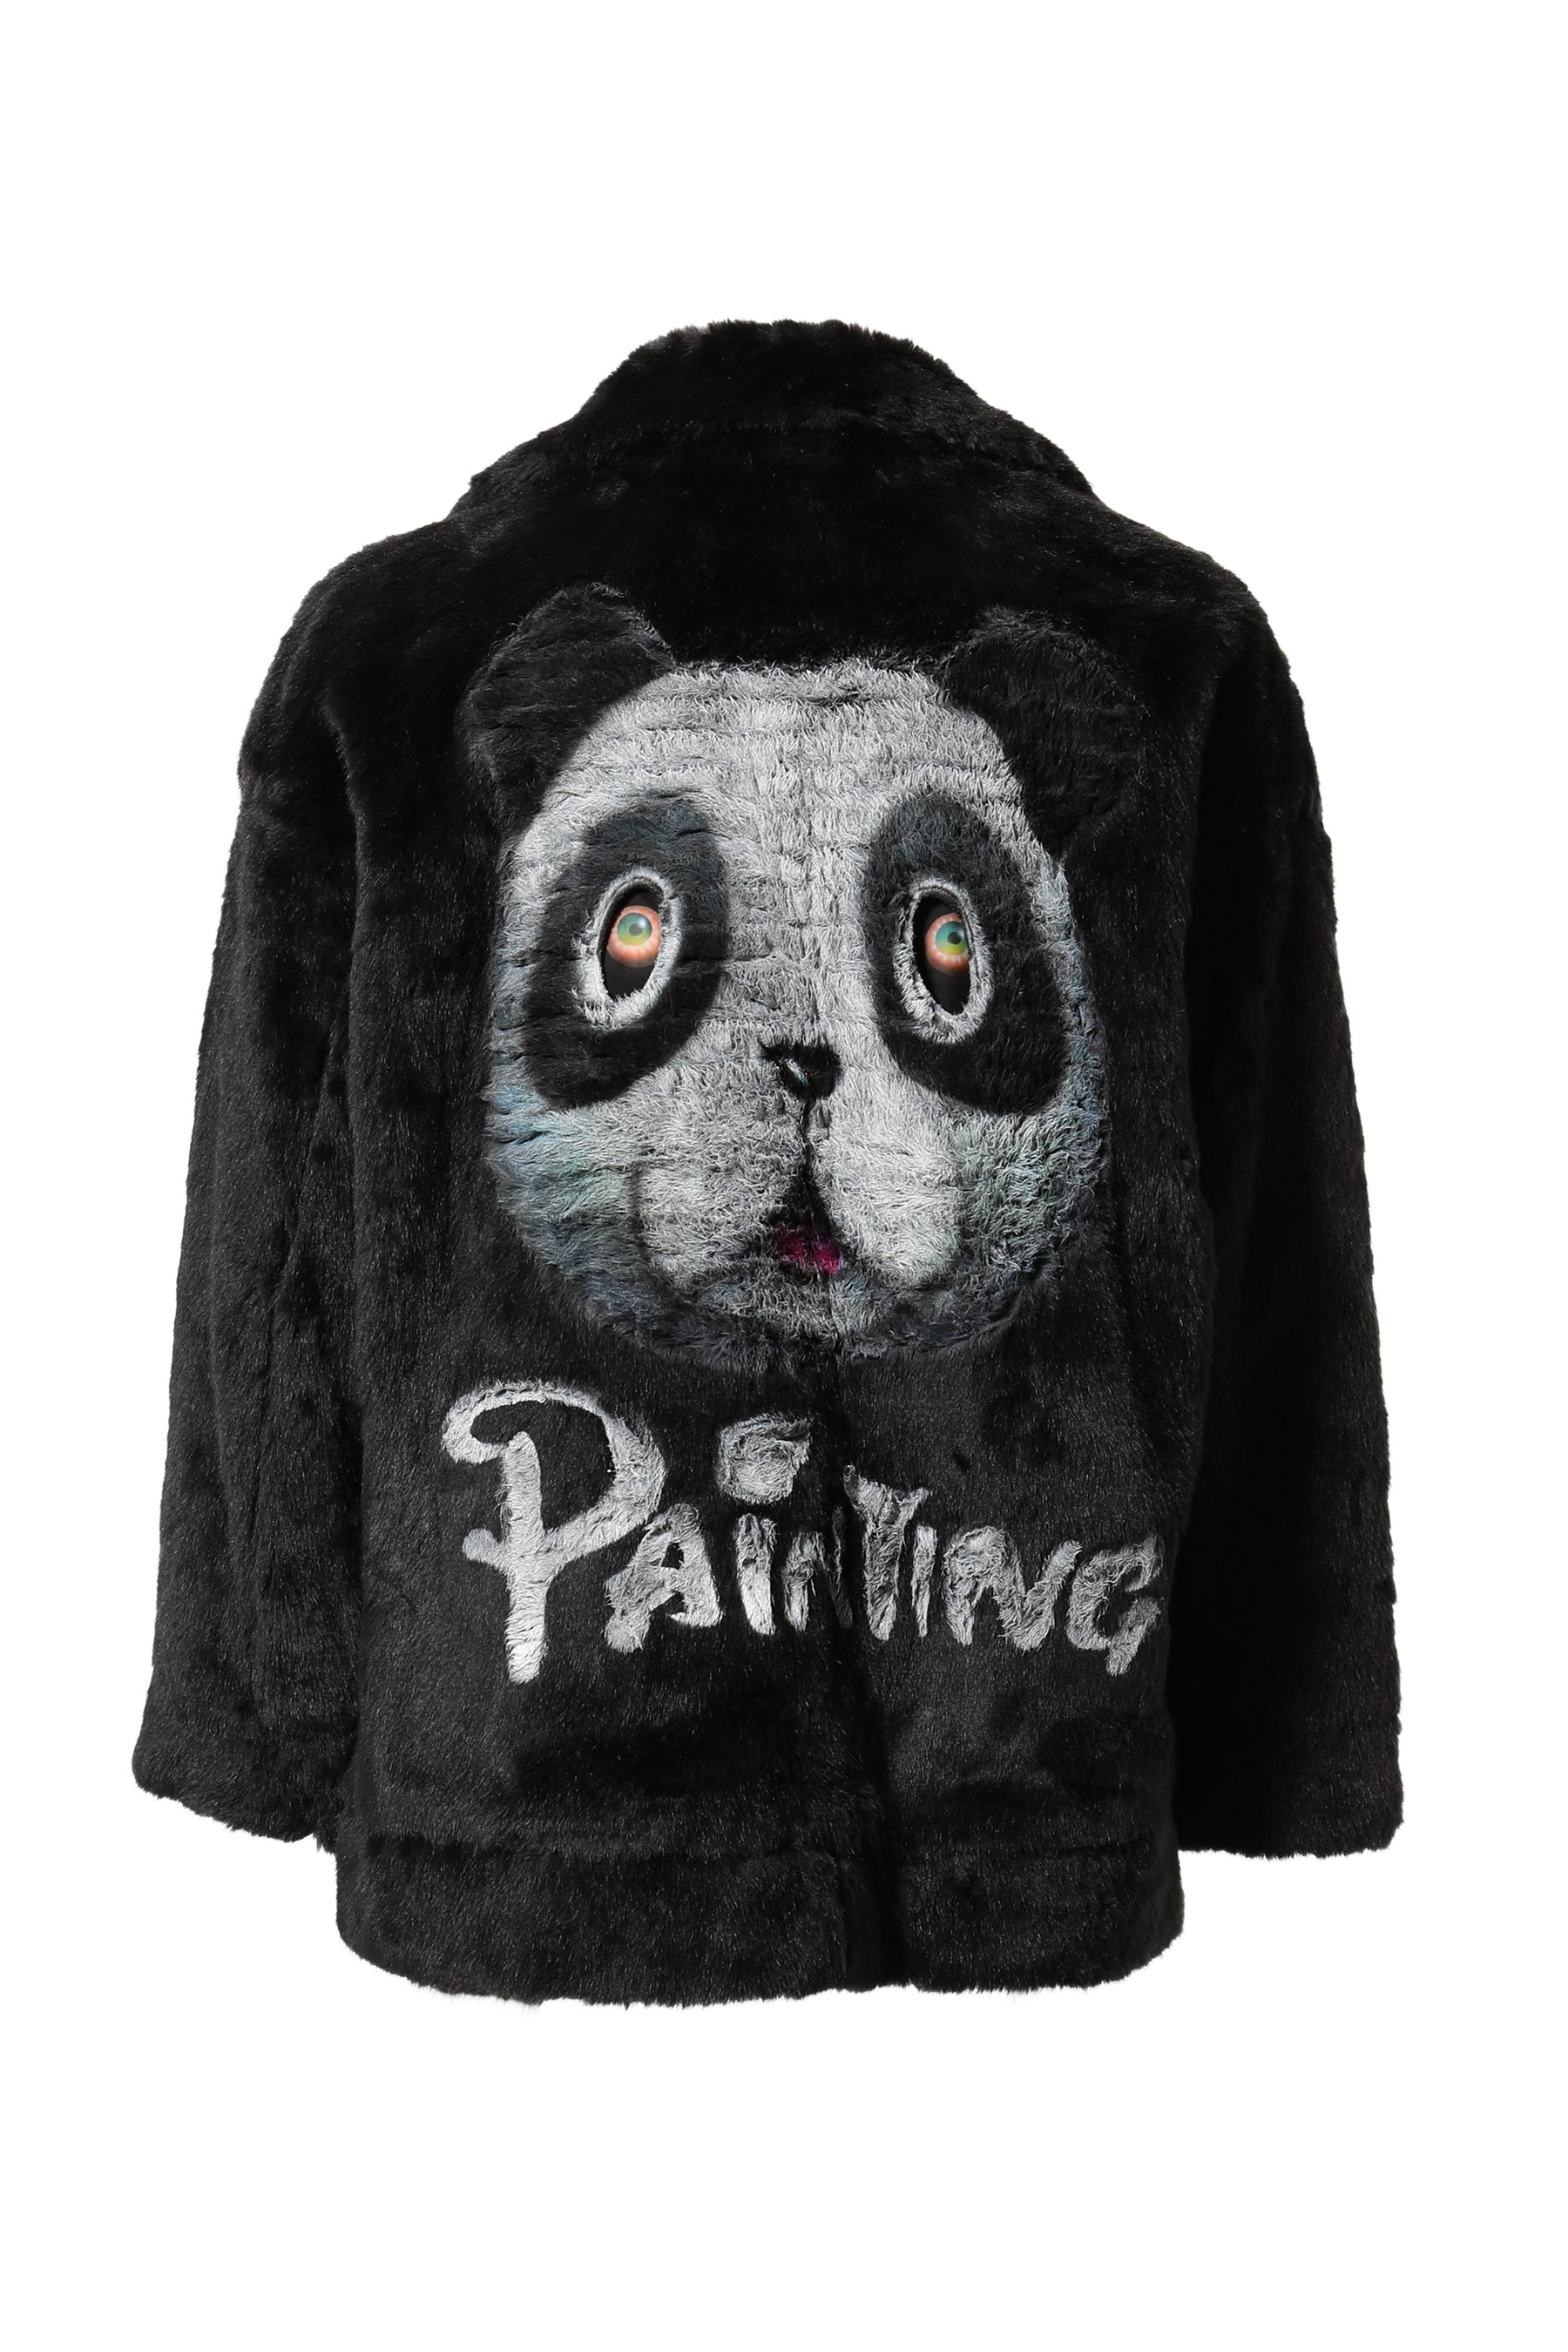 AND-PAINTED FUR JACKET / BLK